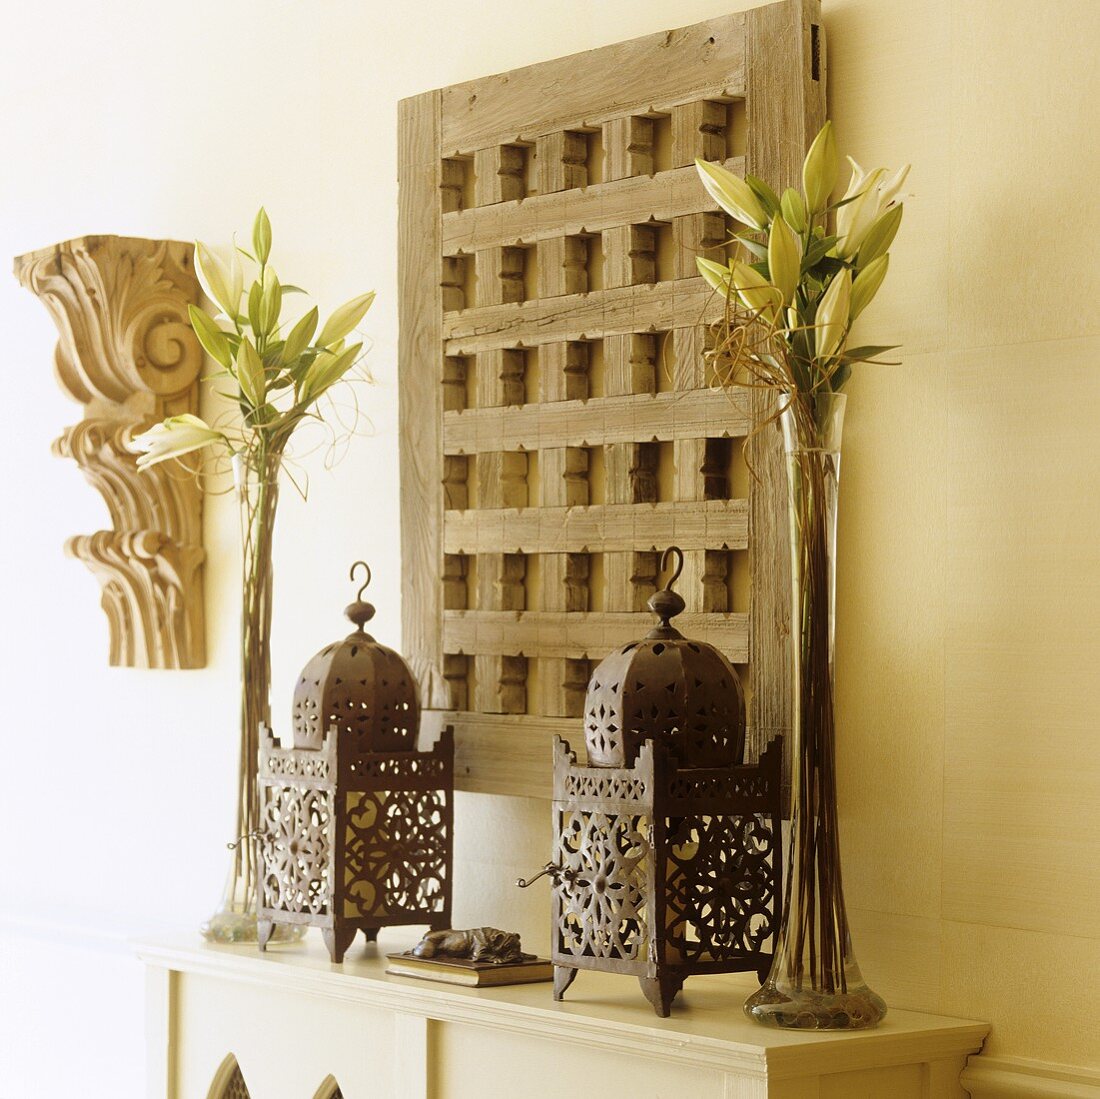 Oriental metal lanterns and lilies in glass vases in front of a rustic wooden latice